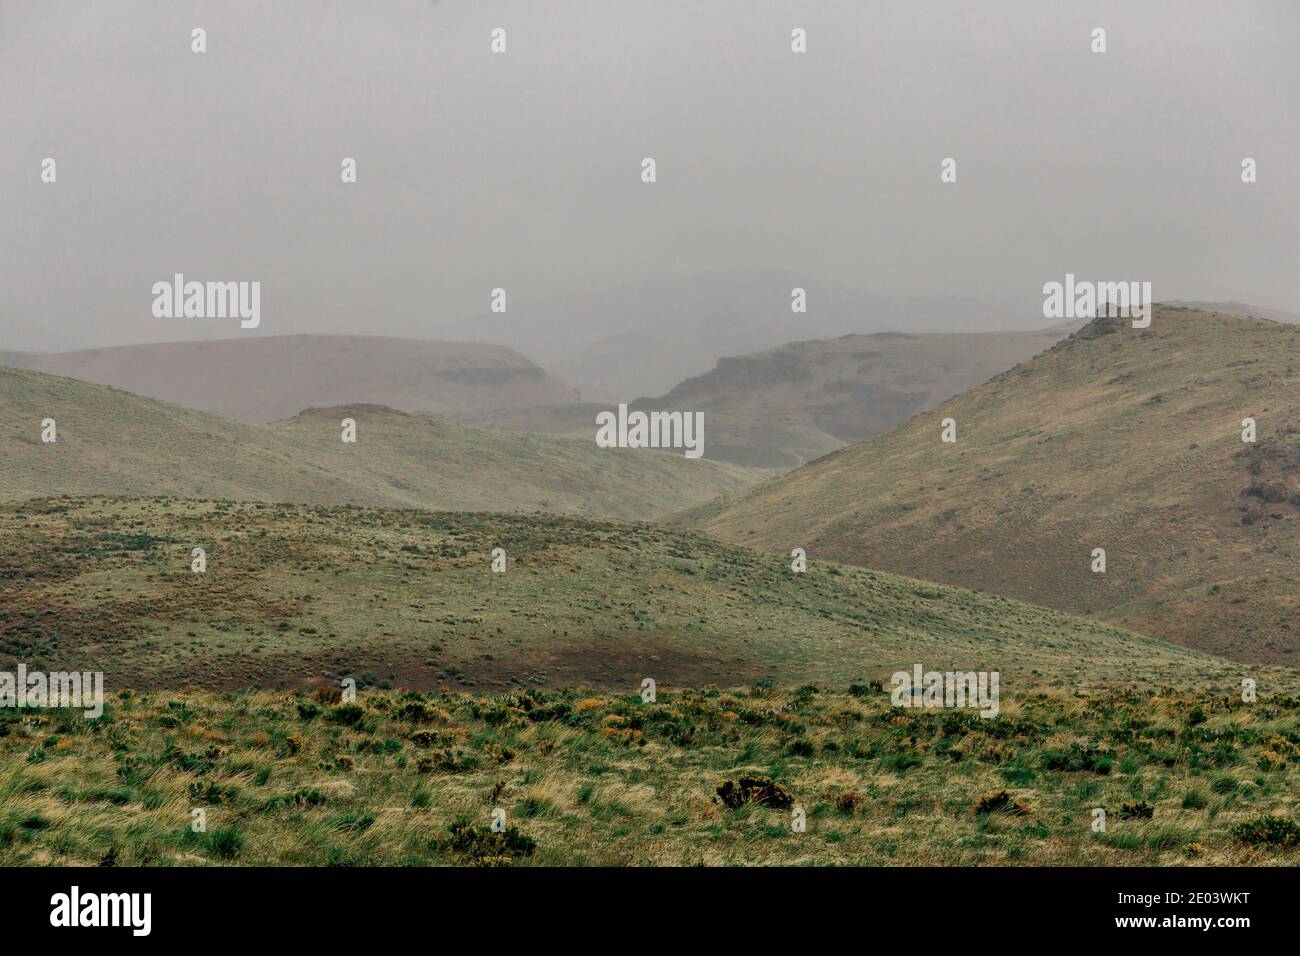 A landscape on a cloudy day in Owyhee, Oregon. Stock Photo